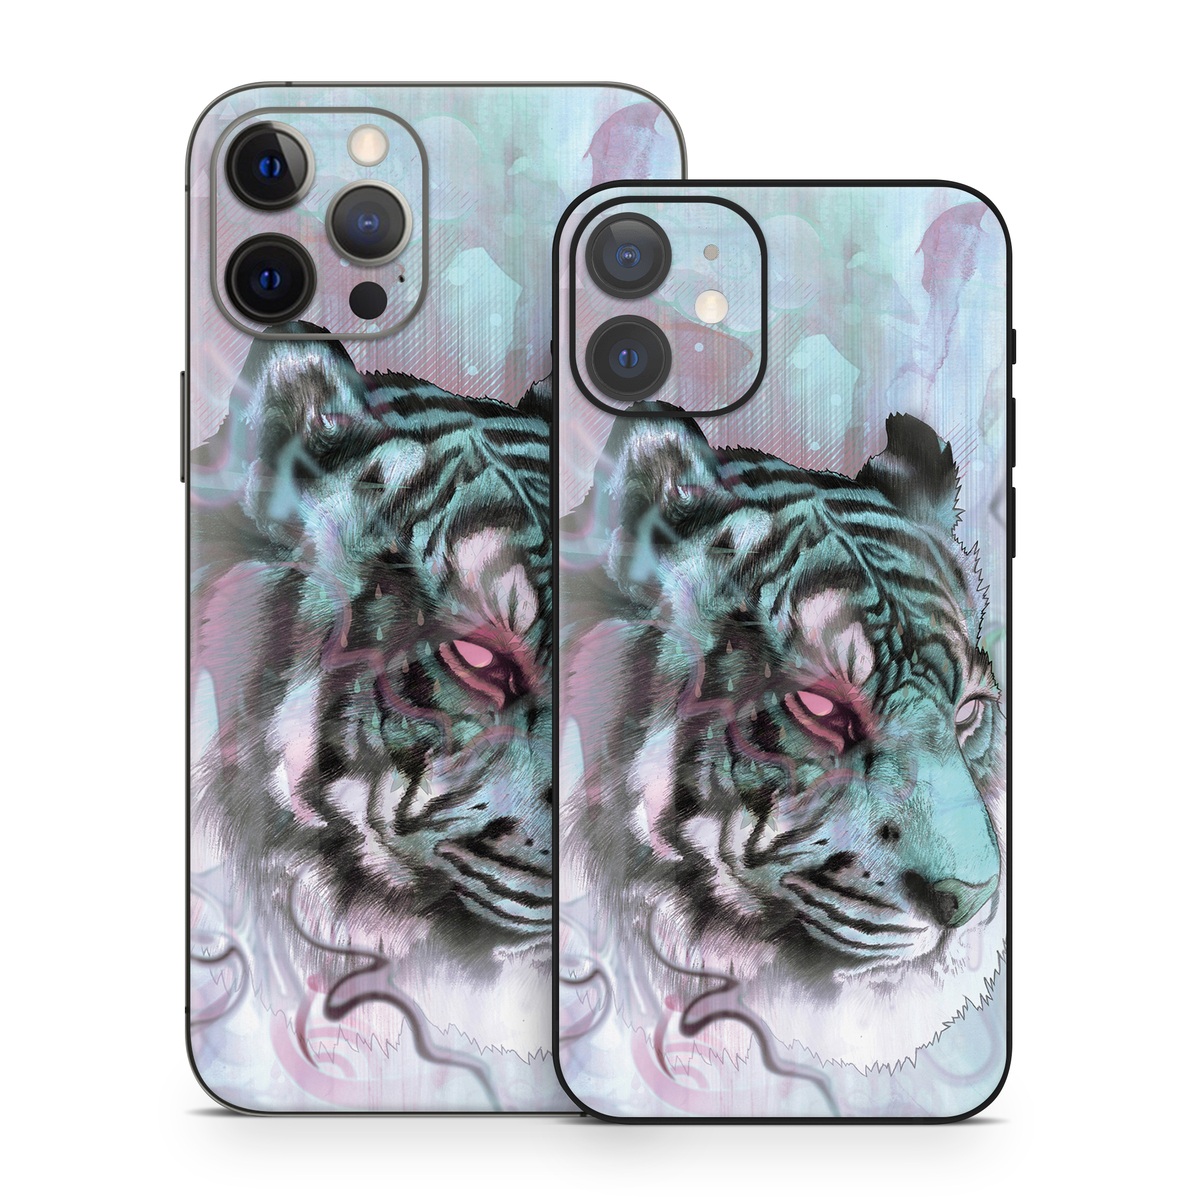 iPhone 12 Series Skin design of Watercolor paint, Illustration, Art, Visual arts, Drawing, Graphic design, Pattern, Painting, Acrylic paint, Fictional character, with gray, purple, black colors